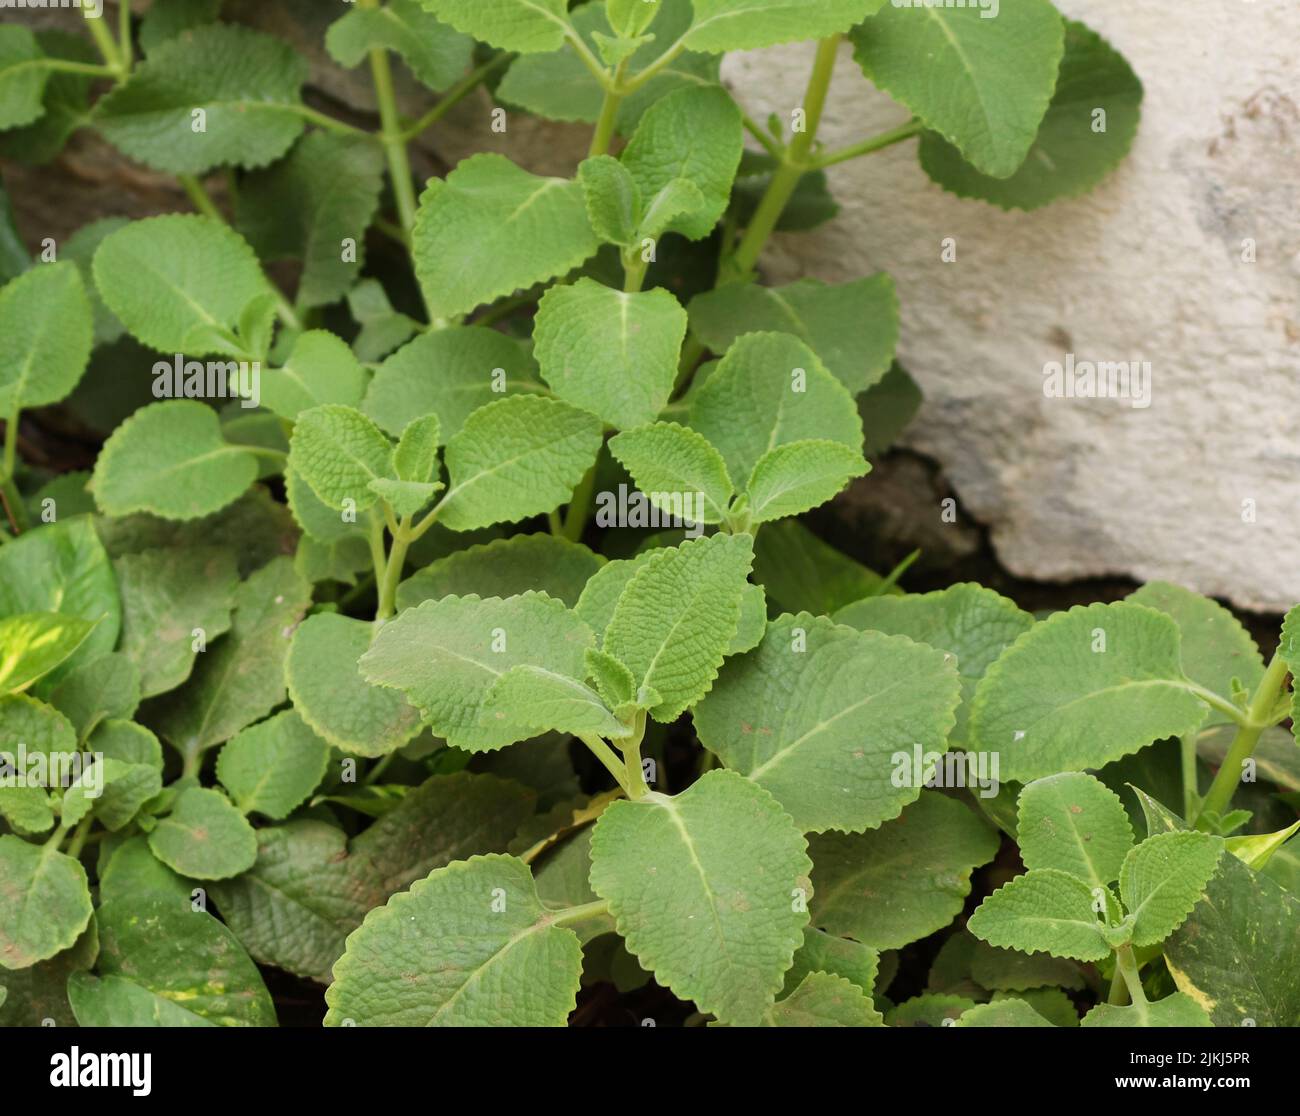 A close-up shot of Plectranthus fragrant leaves growing in the garden. Stock Photo